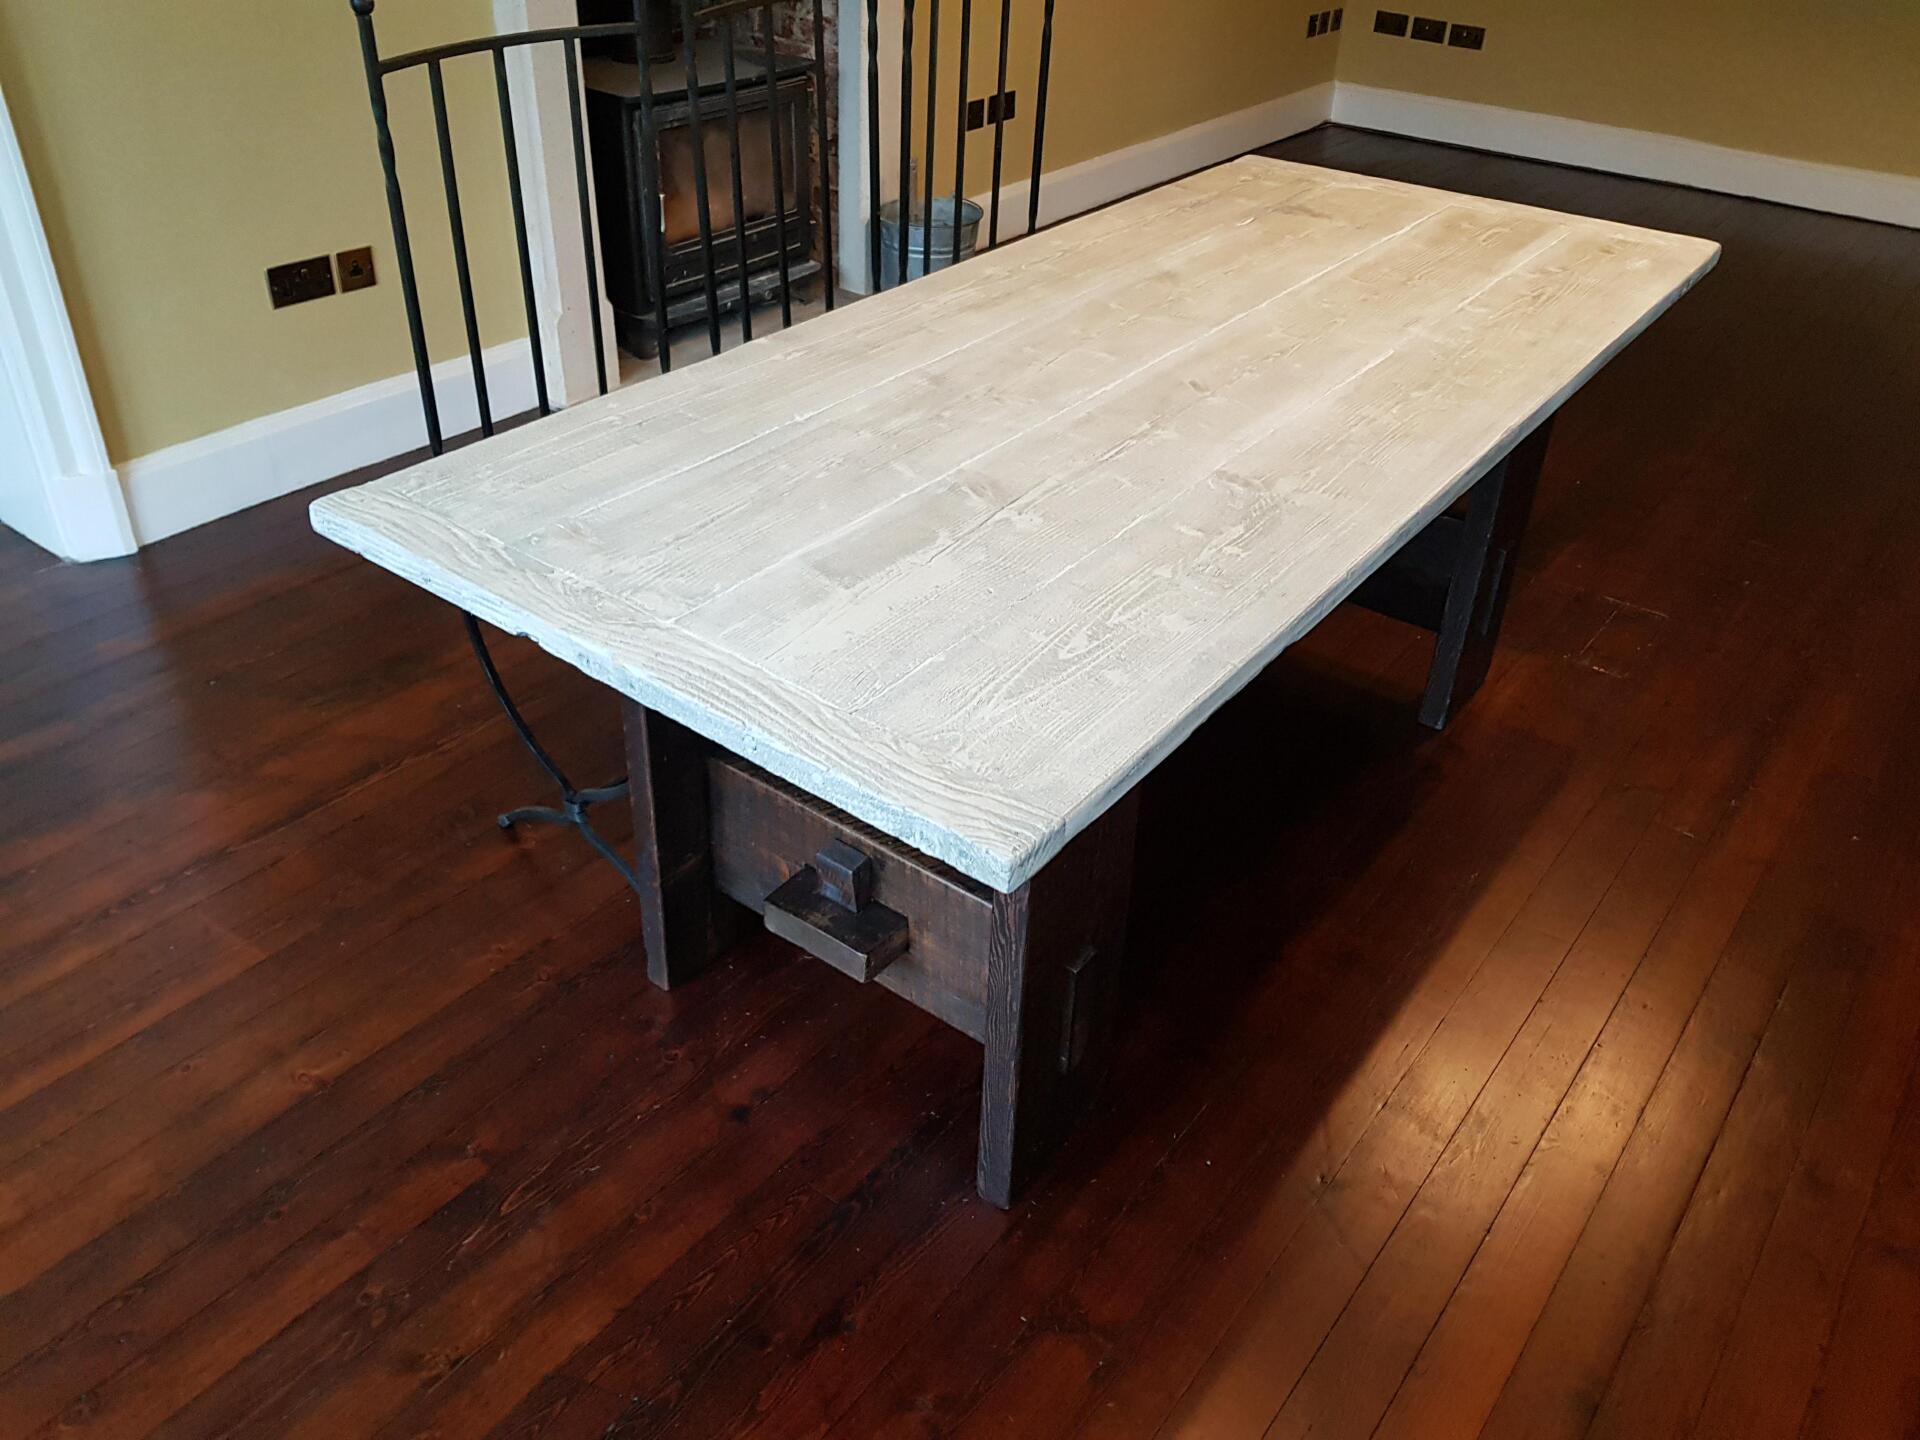 White wood effect reclaimed table top, jacobean dark traditional table base